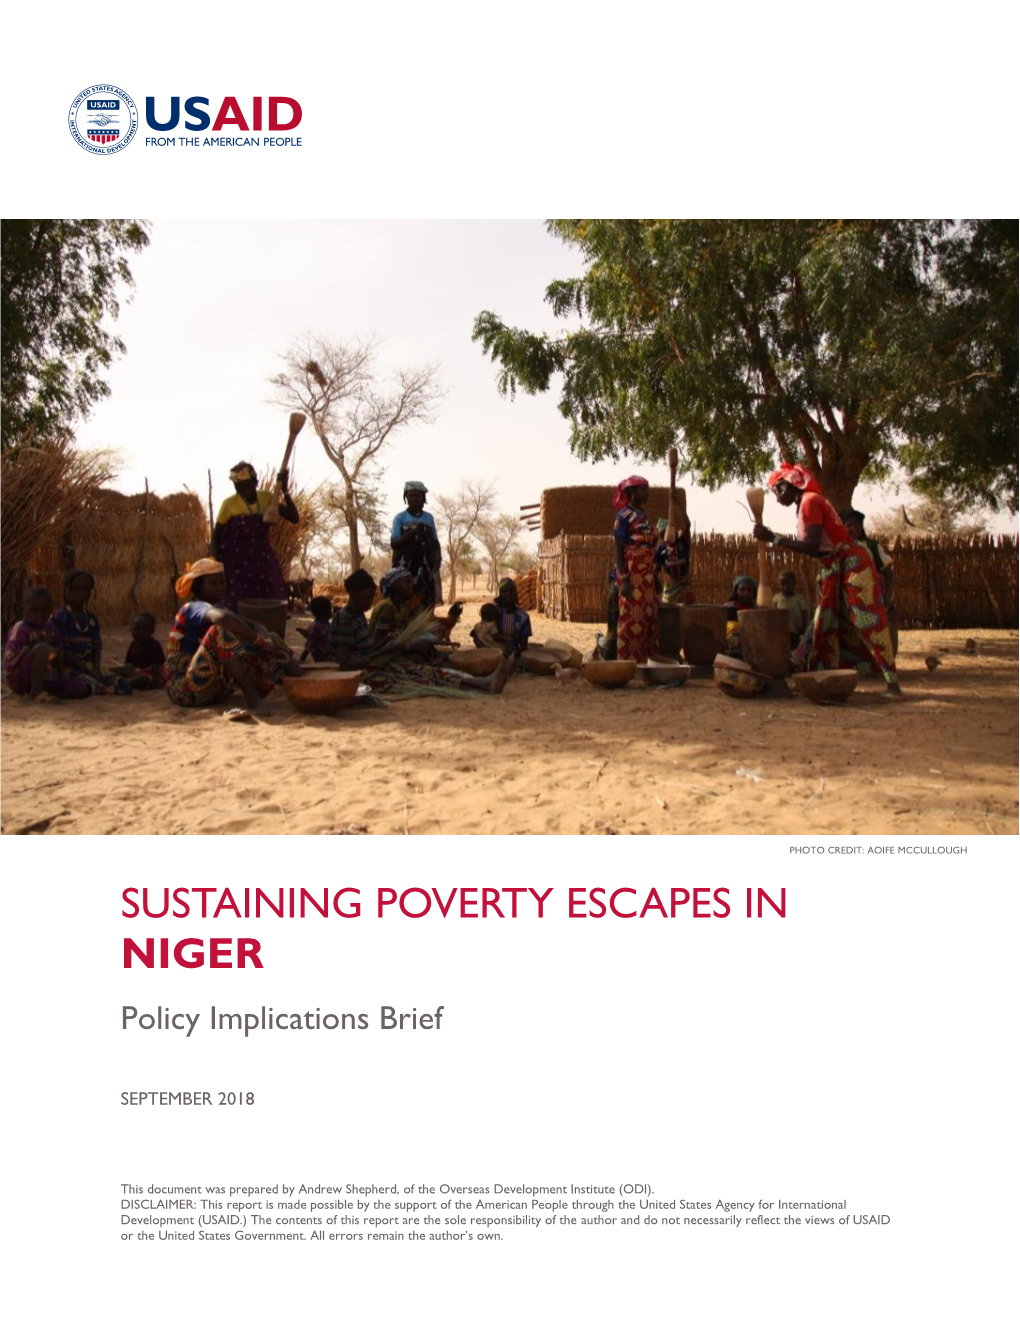 SUSTAINING POVERTY ESCAPES in NIGER Policy Implications Brief